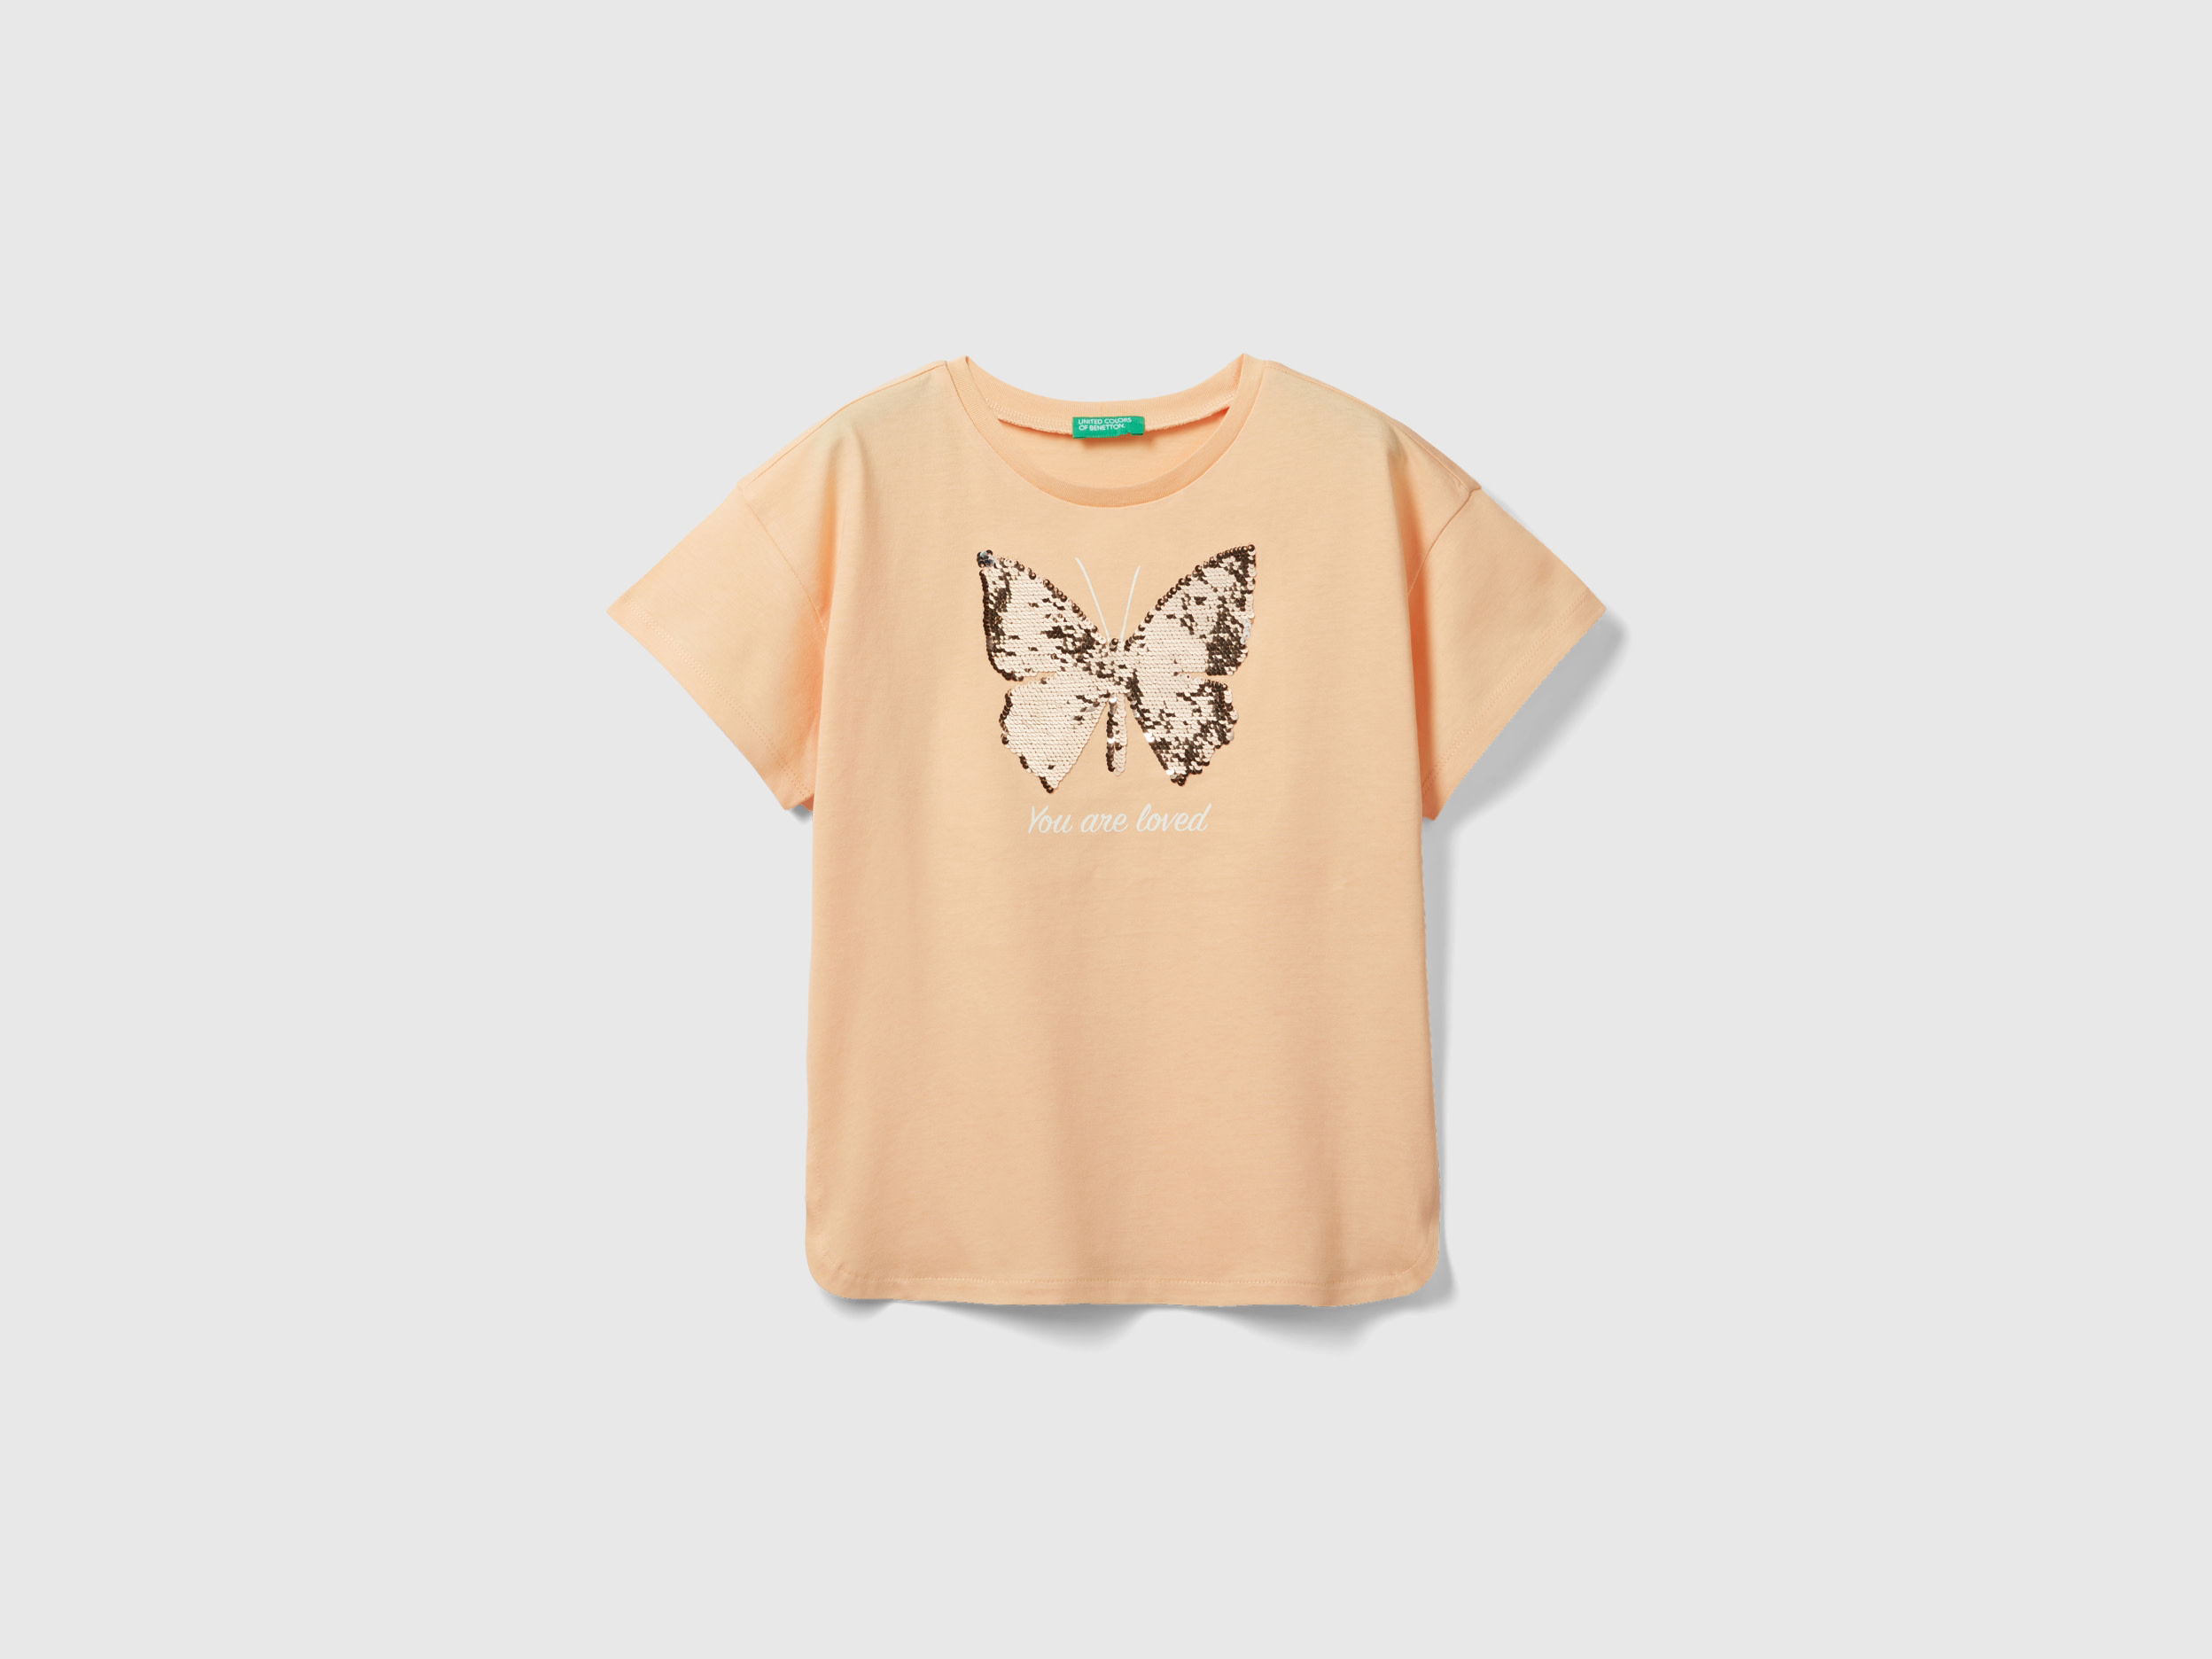 Image of Benetton, T-shirt With Reversible Sequins, size 2XL, Peach, Kids